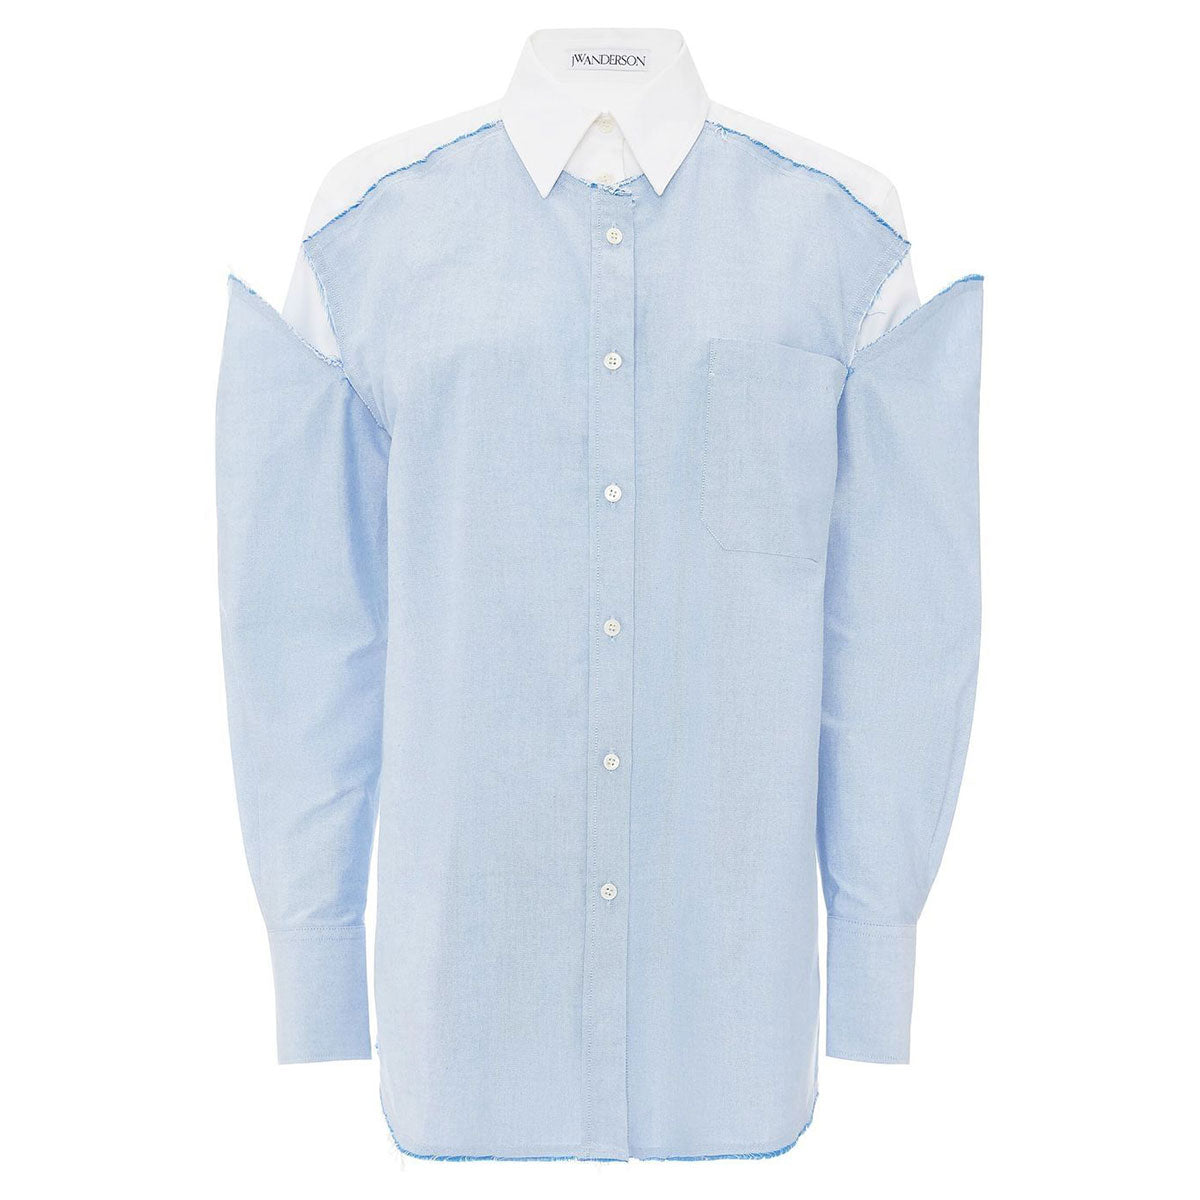 DOUBLE LAYER SHIRT - JW Anderson